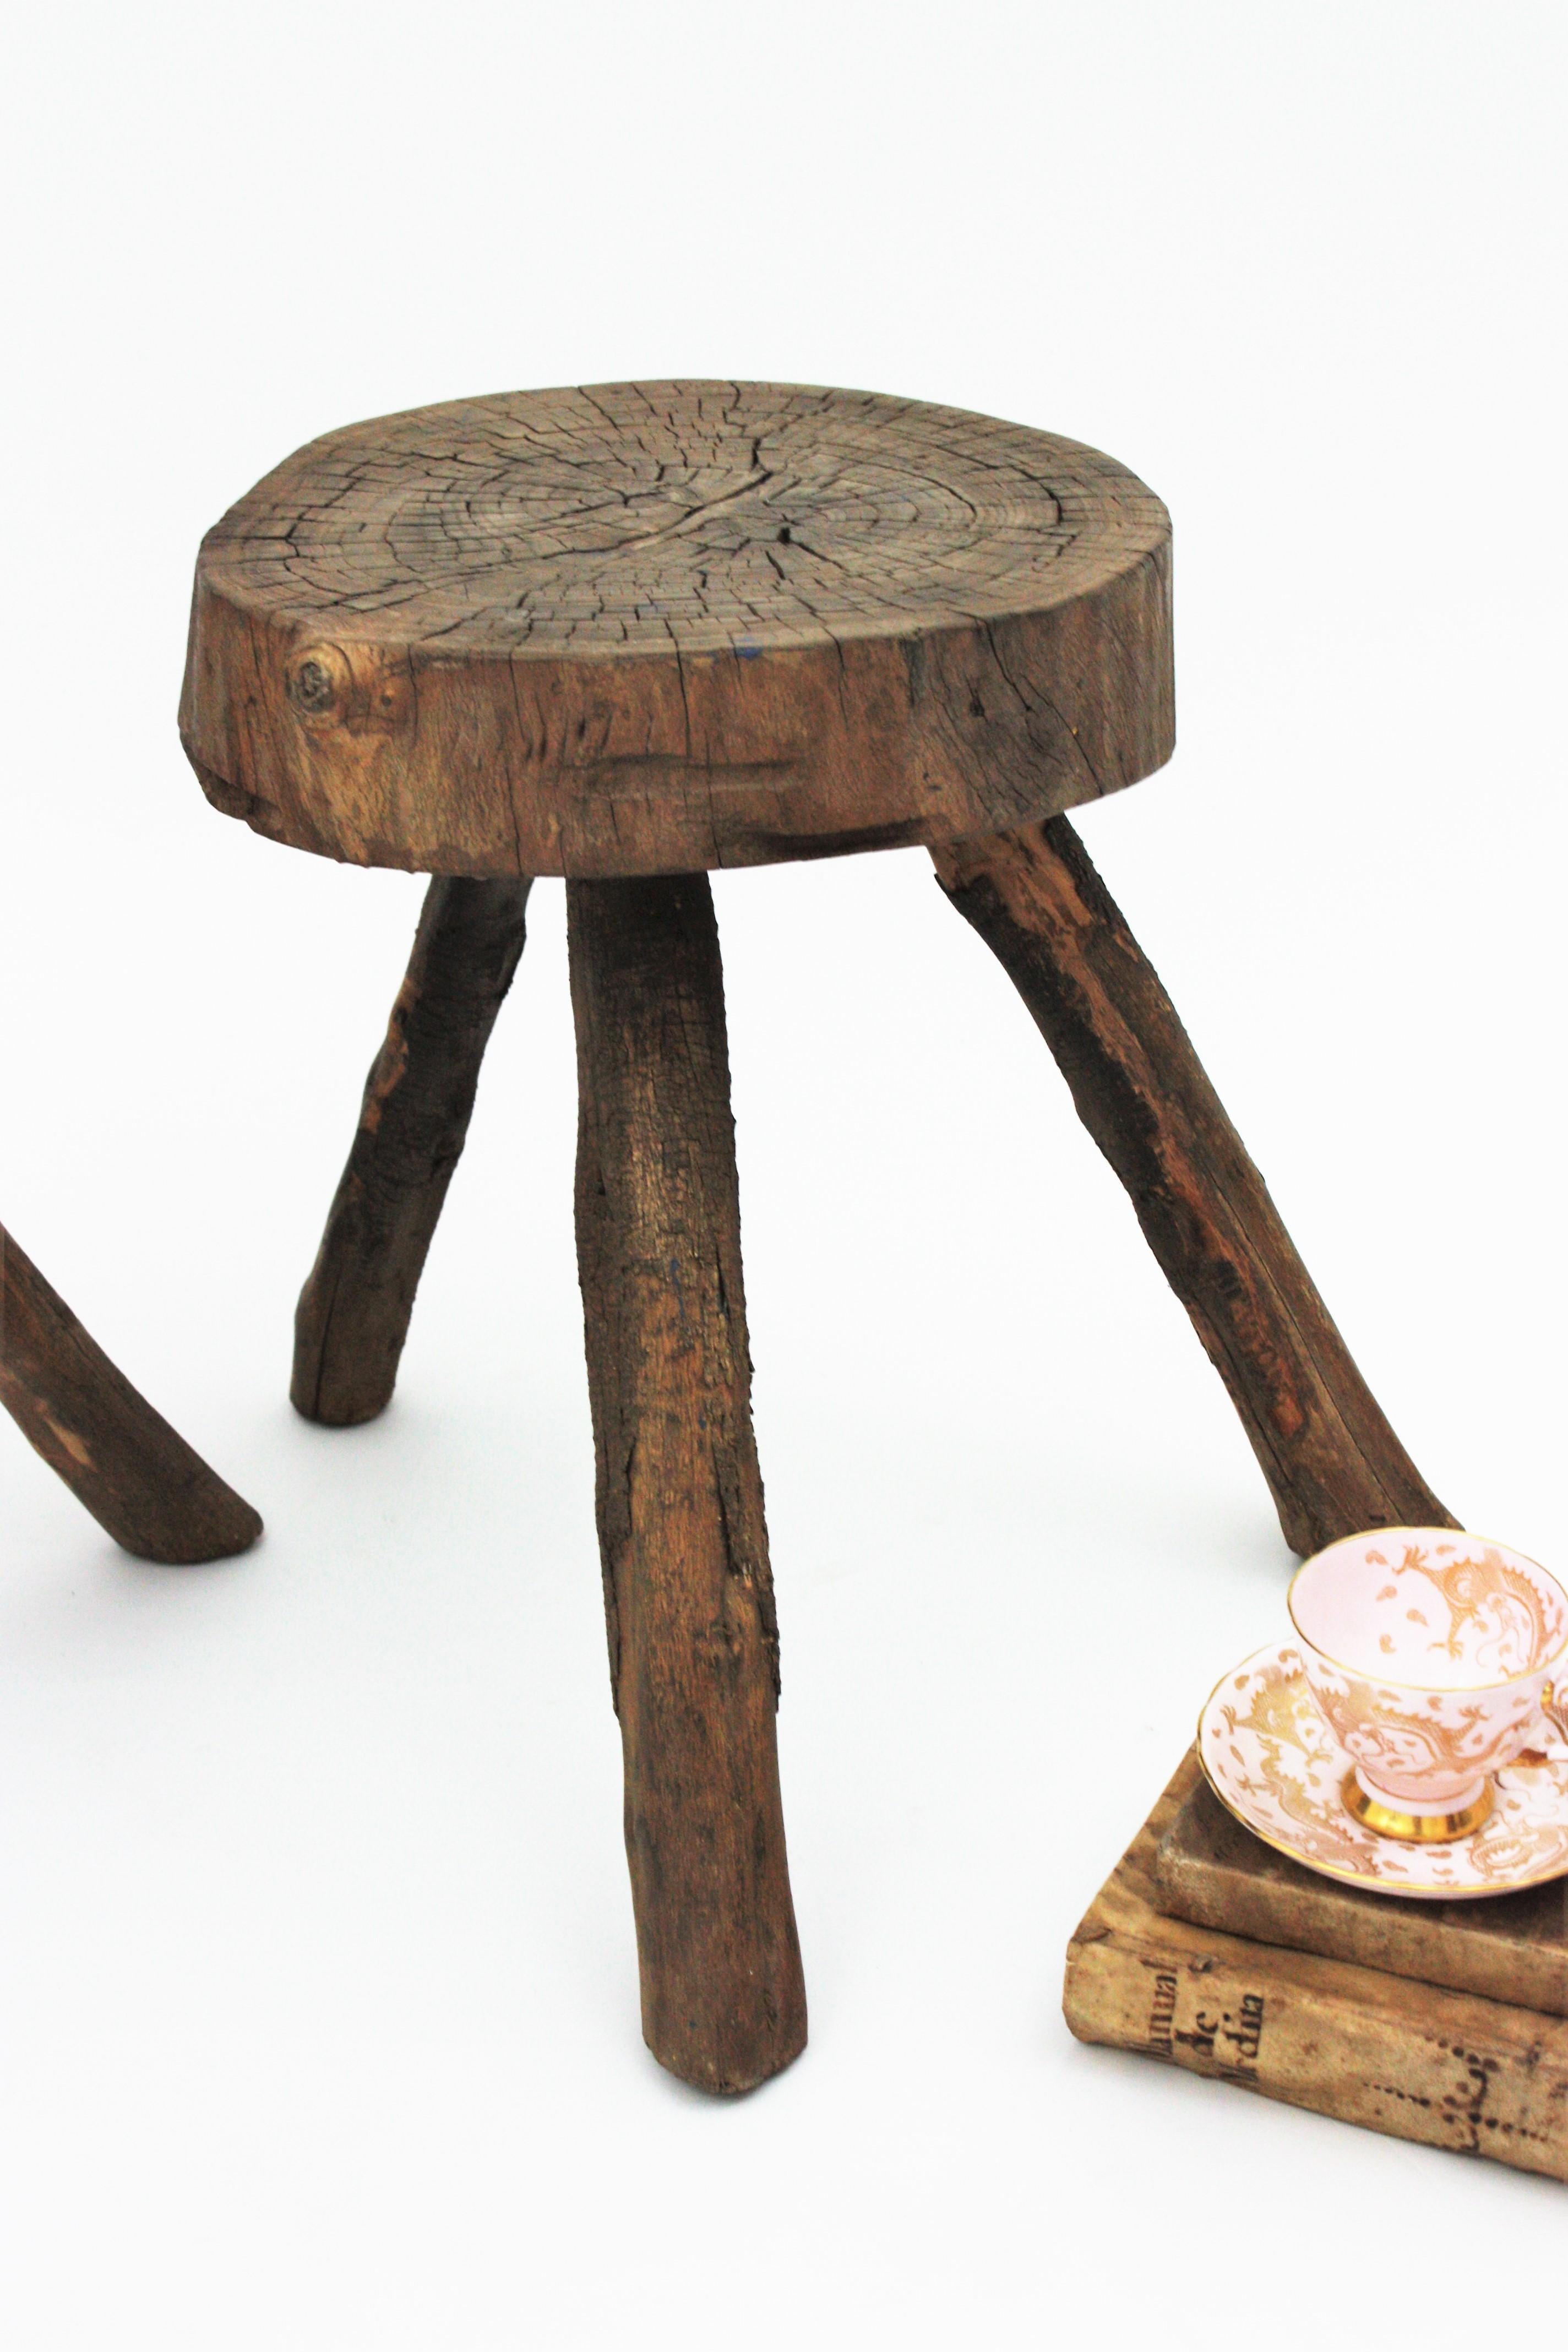 Pair of Spanish Rustic Wood Tripod Stools or Side Tables 11